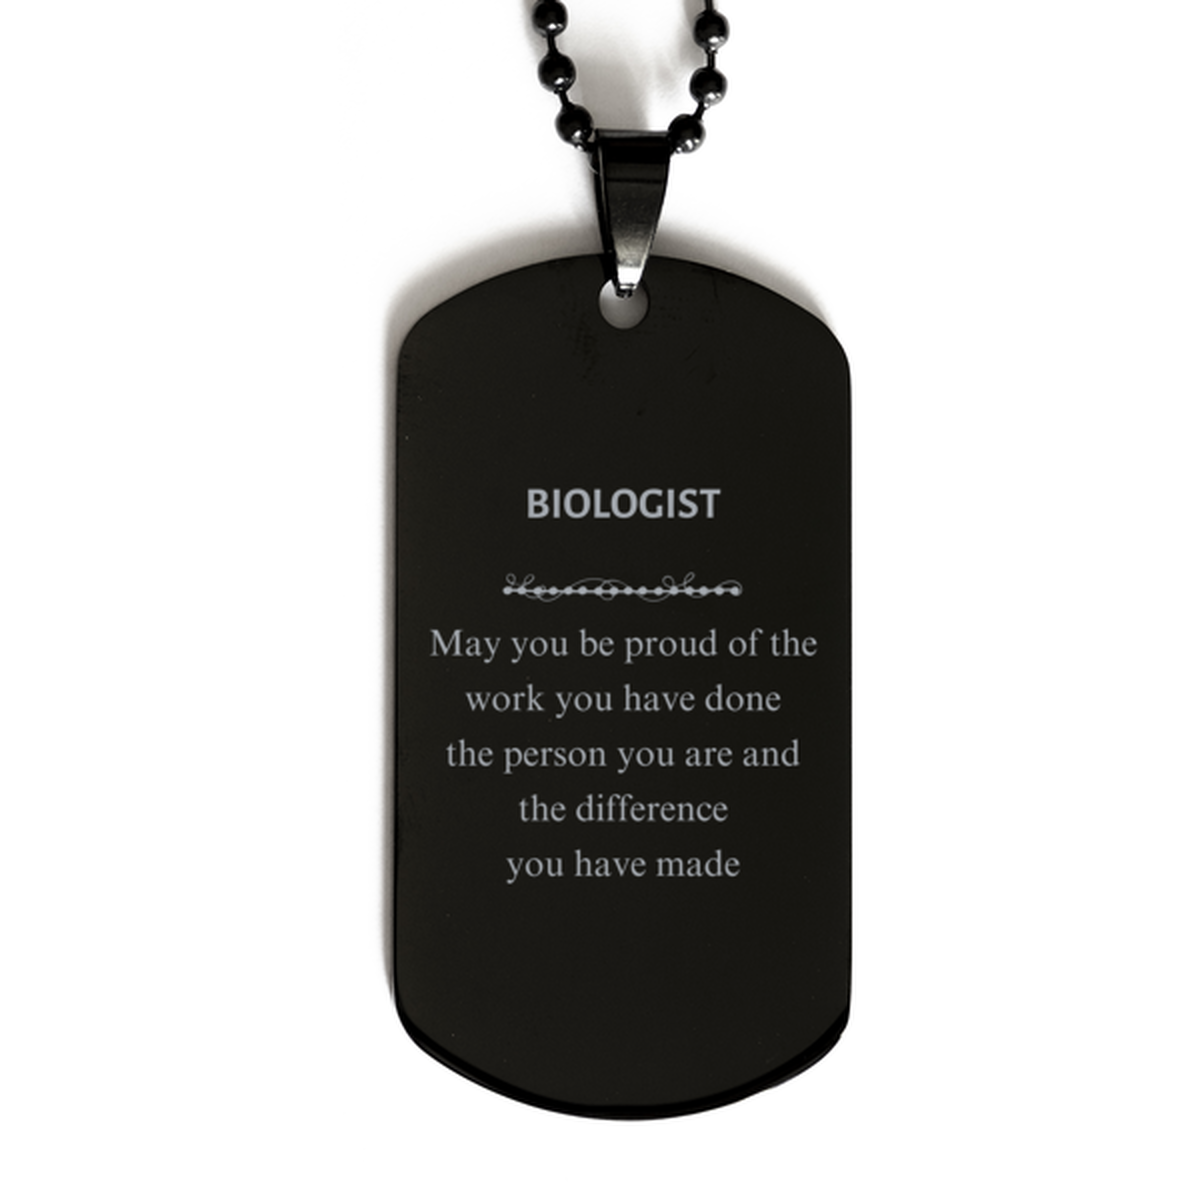 Biologist May you be proud of the work you have done, Retirement Biologist Black Dog Tag for Colleague Appreciation Gifts Amazing for Biologist